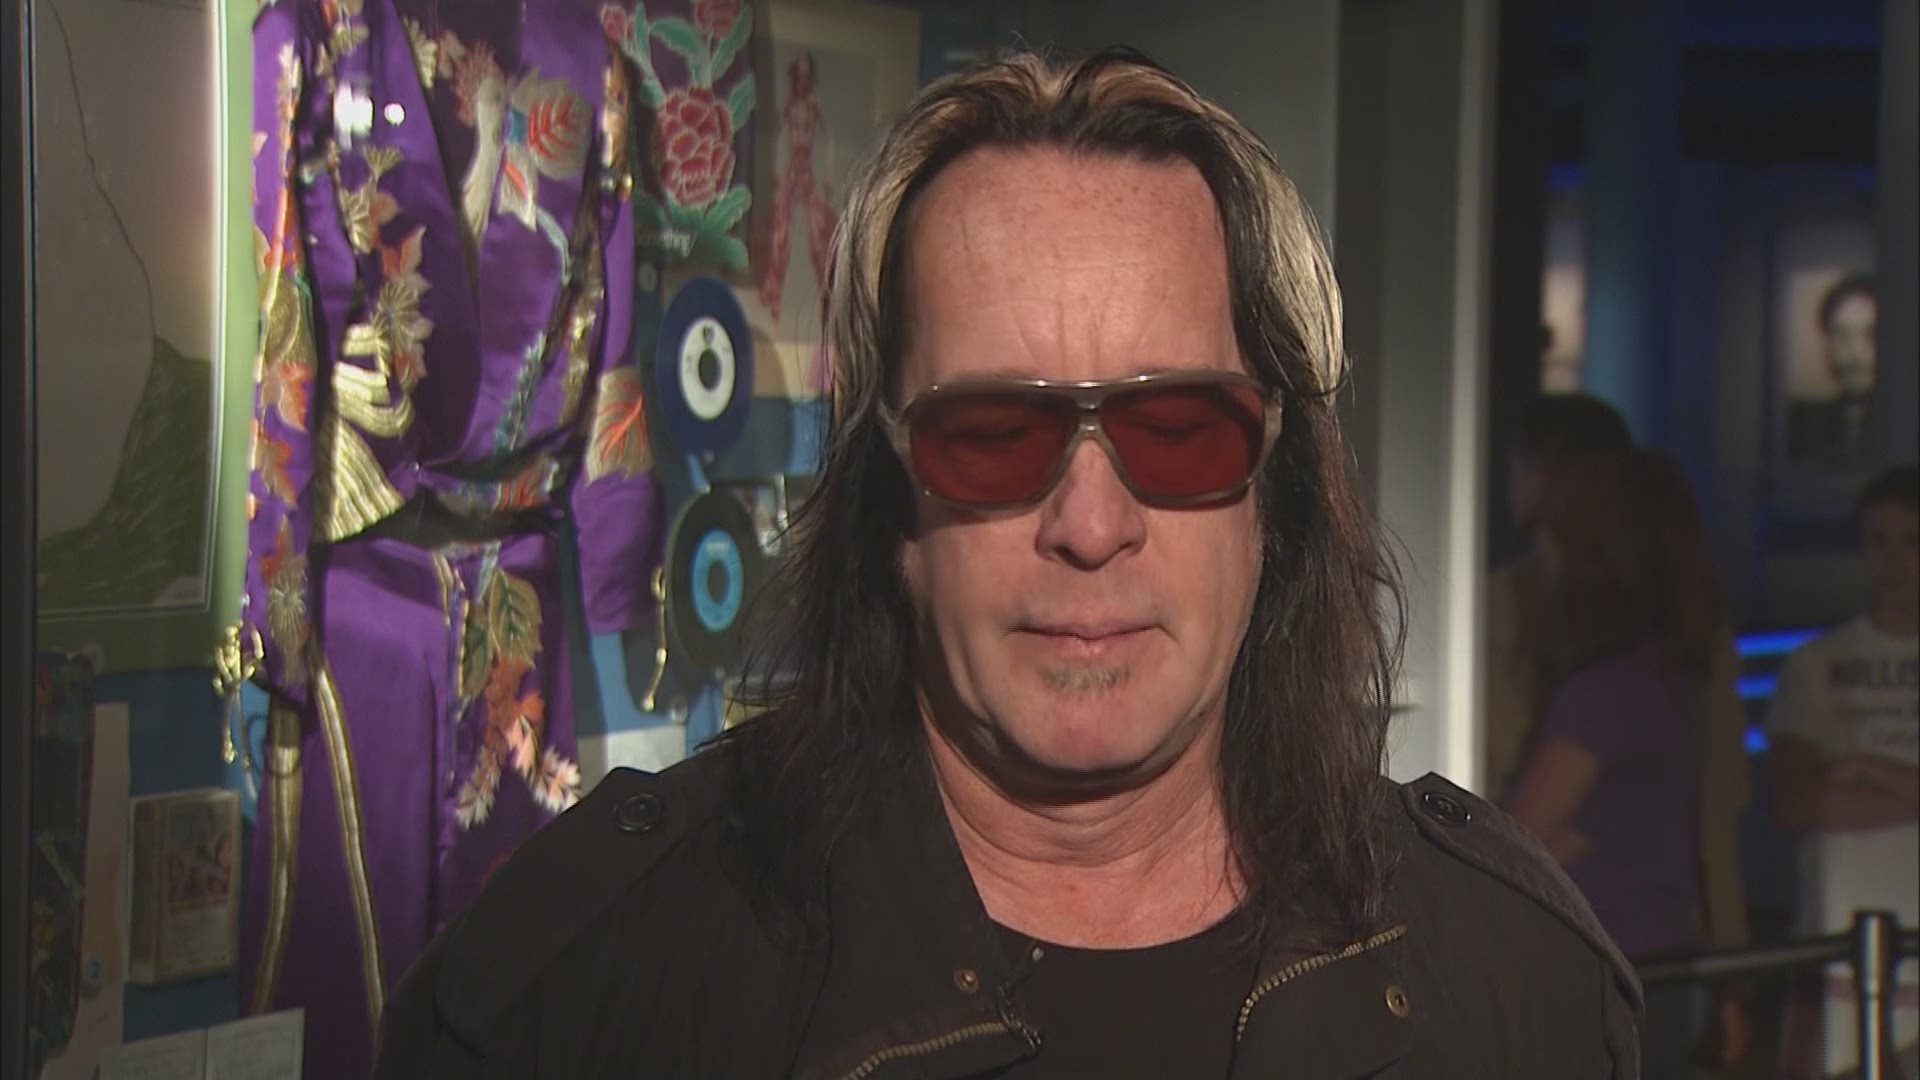 Here is archive footage from a previous WKYC interview where Todd Rundgren describes his love of Cleveland. 'It's the fans that really enable it for me.'